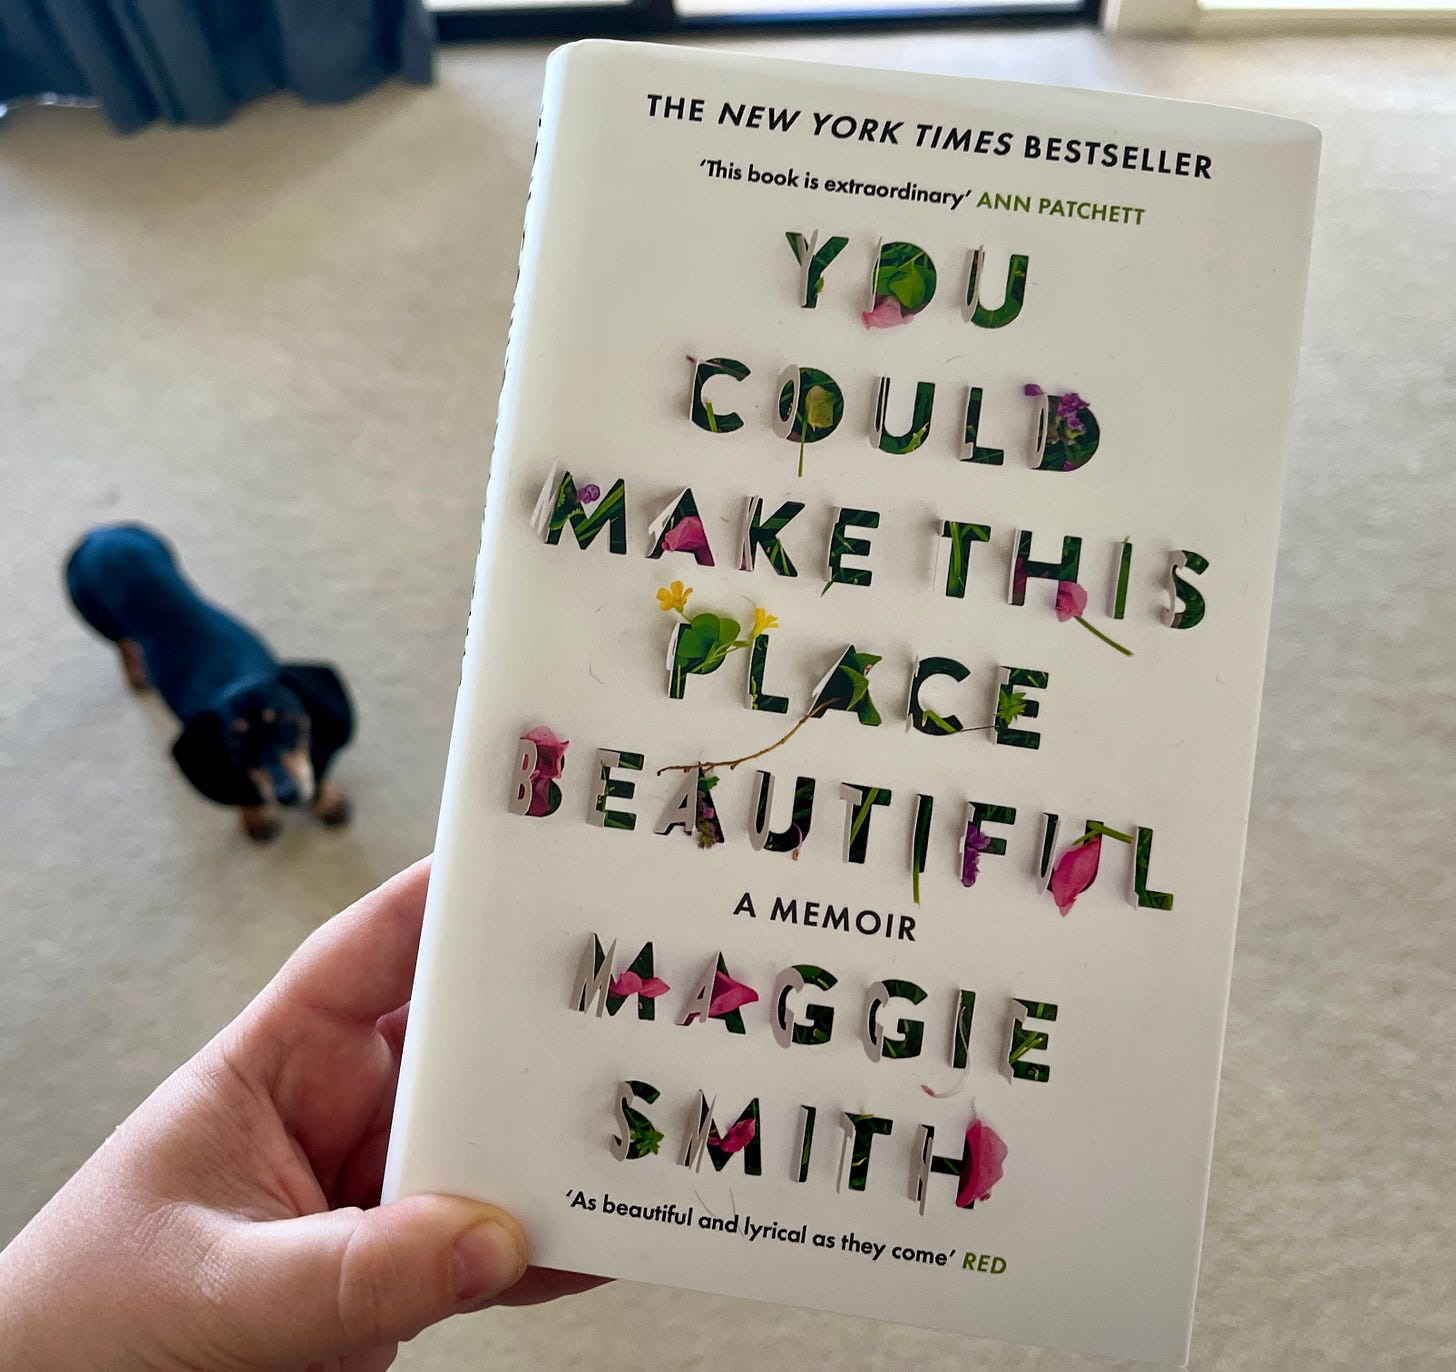 A hand holds Maggie Smith's book "You Could Make This Place Beautiful". In the background a little blurry black dachshund looks on.